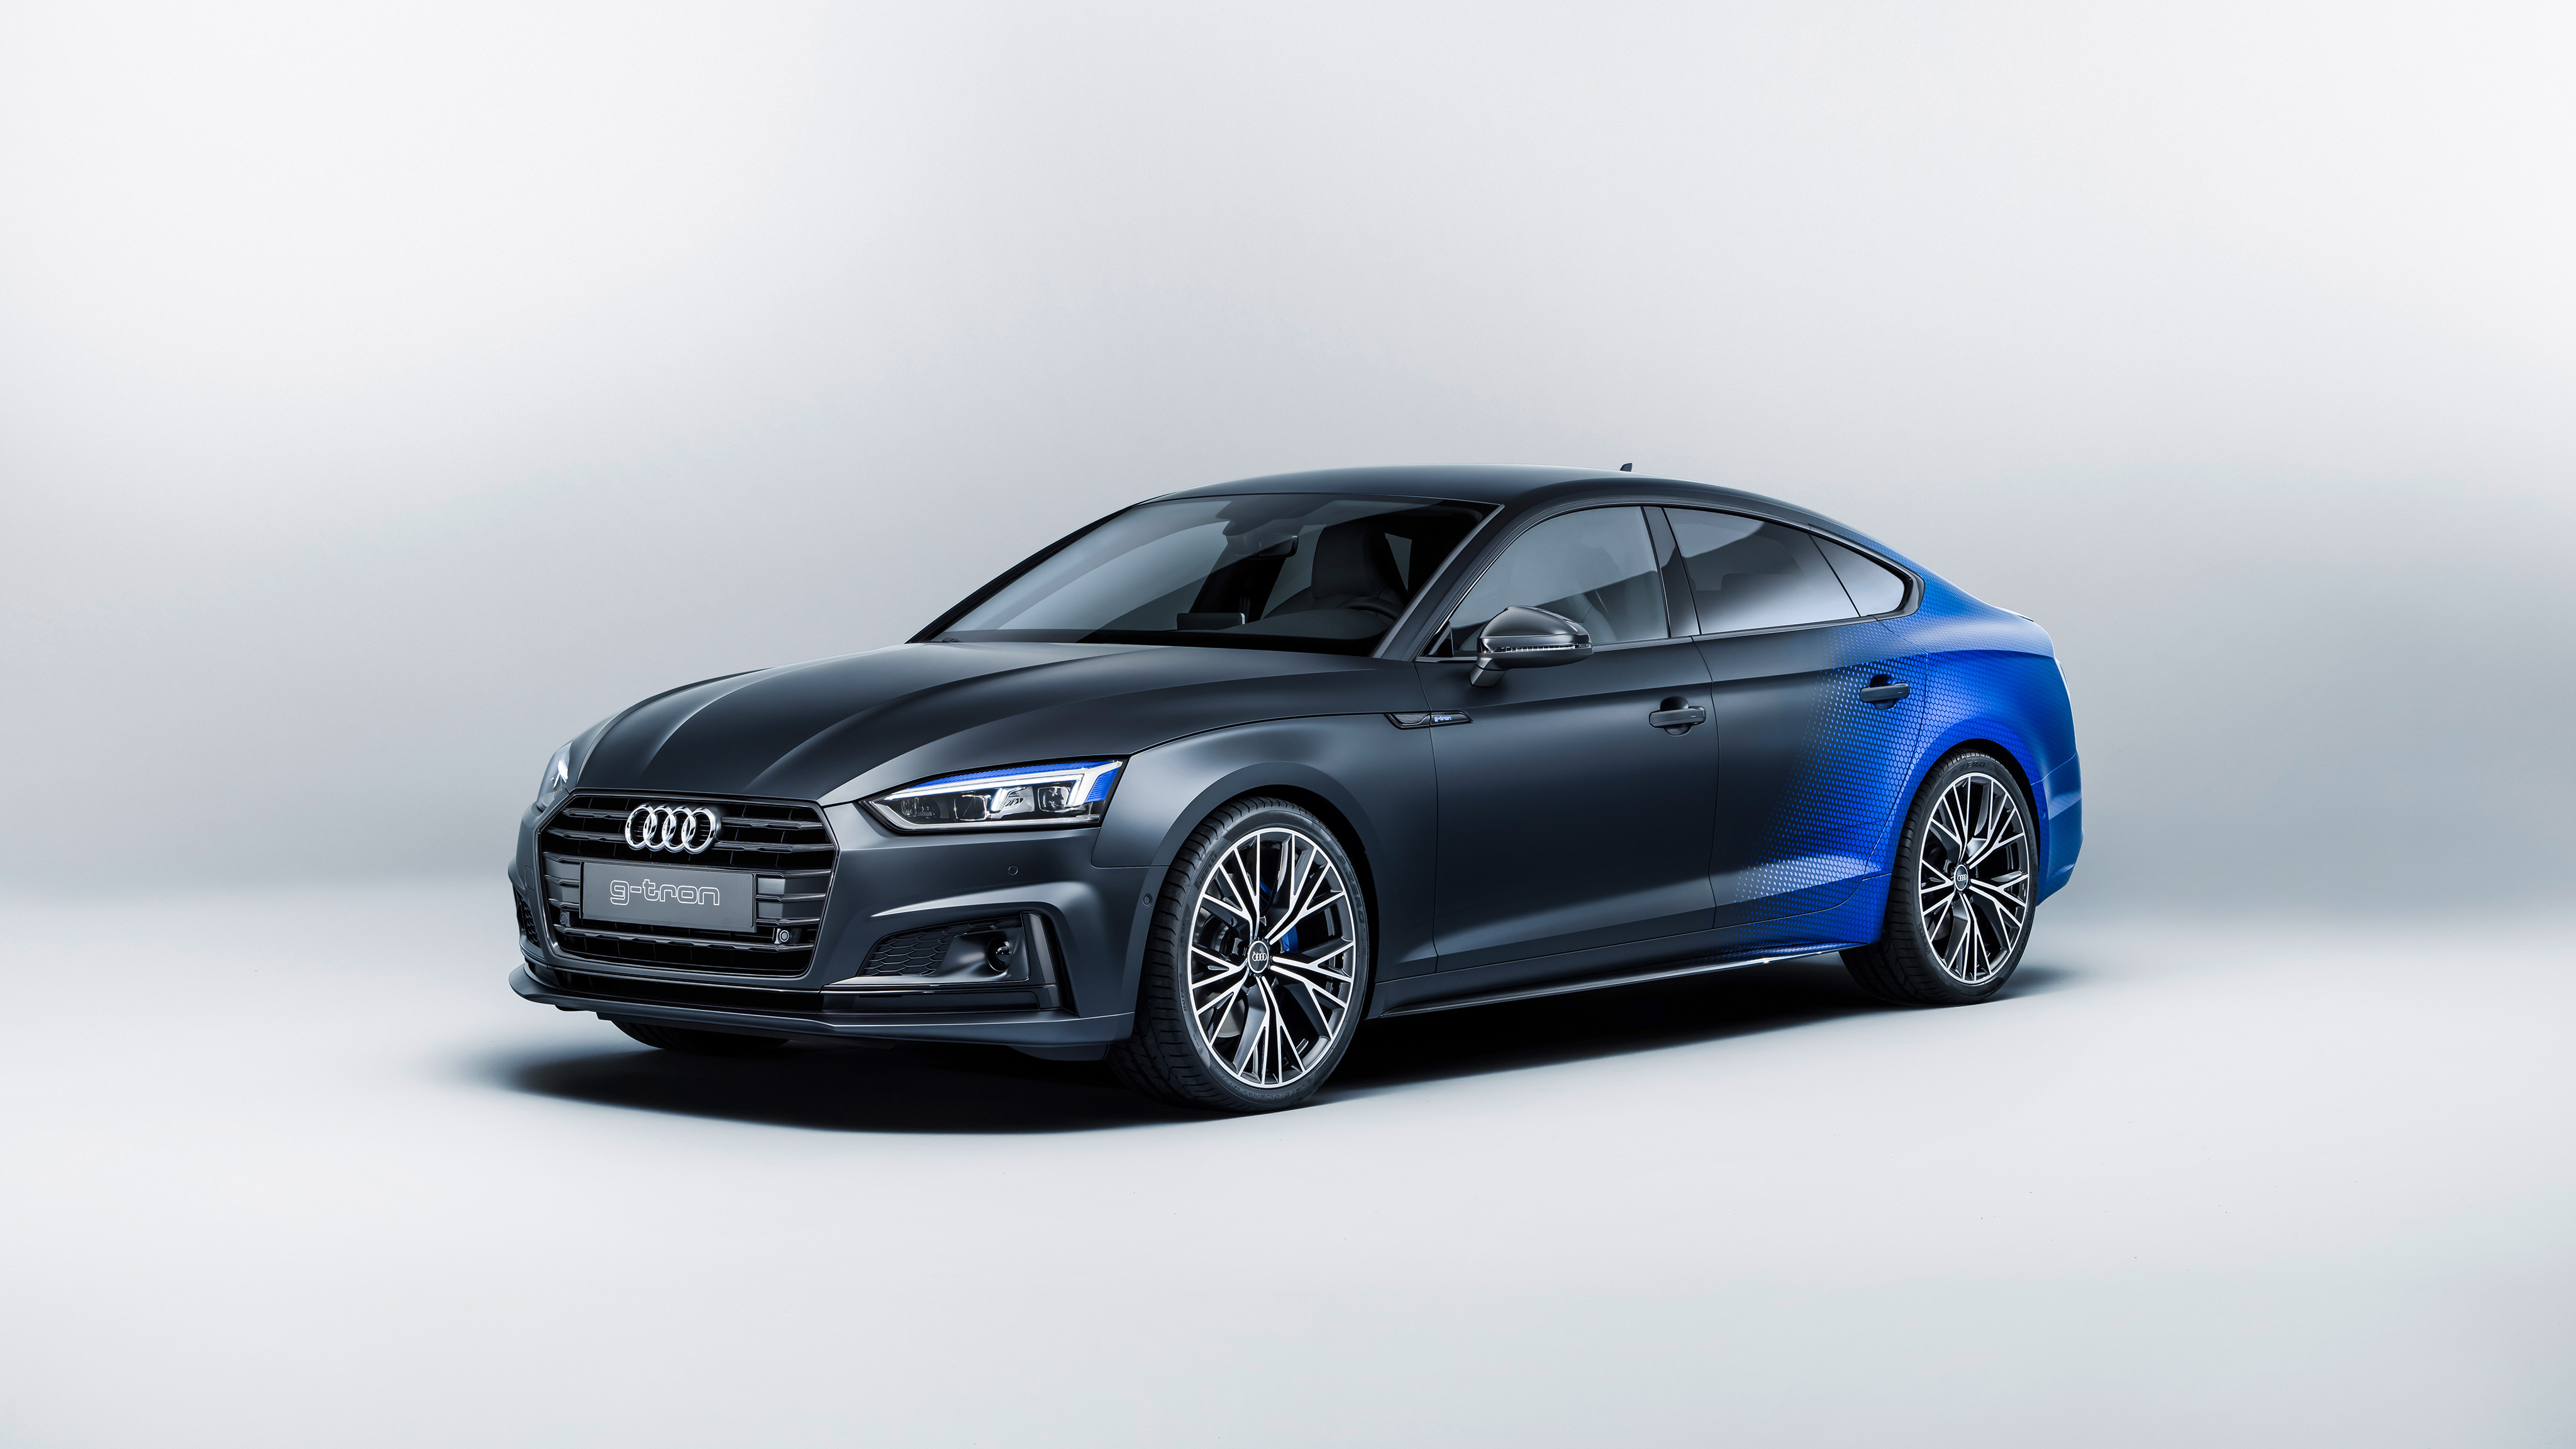 Free Download 2018 Audi A5 Sportback Us Wallpapers And Hd Images Car Pixel 1920x1200 For Your Desktop Mobile Tablet Explore 35 Audi A5 Sportback Wallpapers Audi A5 Sportback Wallpapers